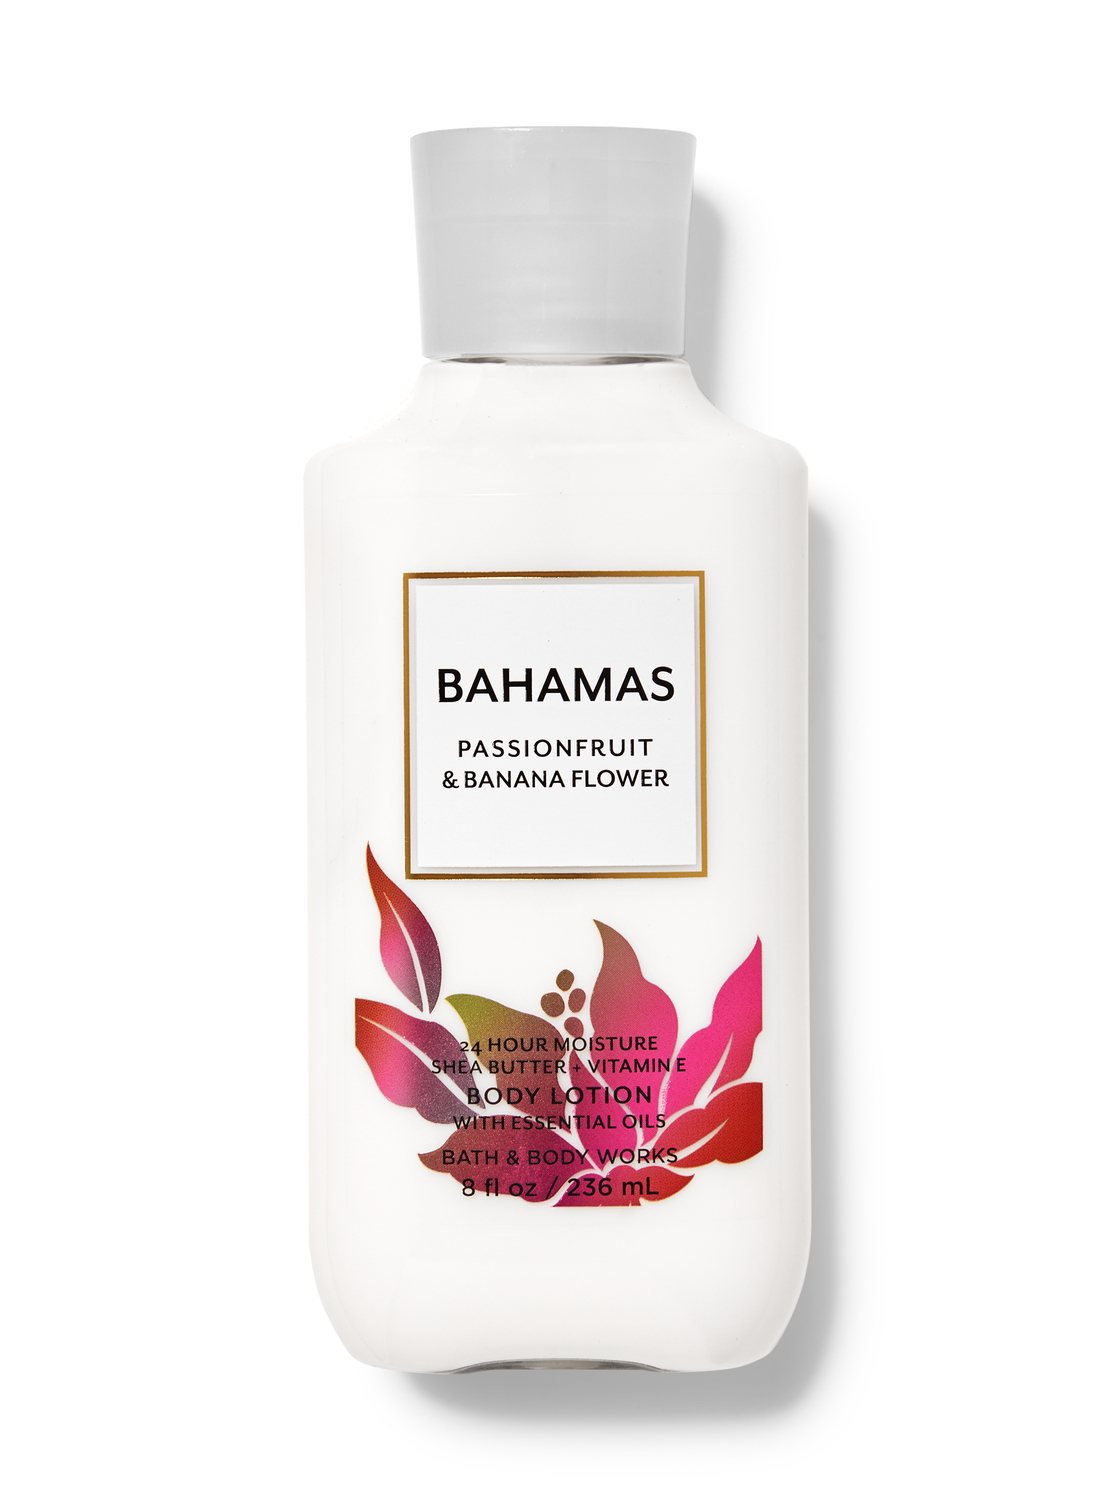 Bahamas Passionfruit And Banana Flower Body Lotionbath And Body Works Thailand Official Site 0557